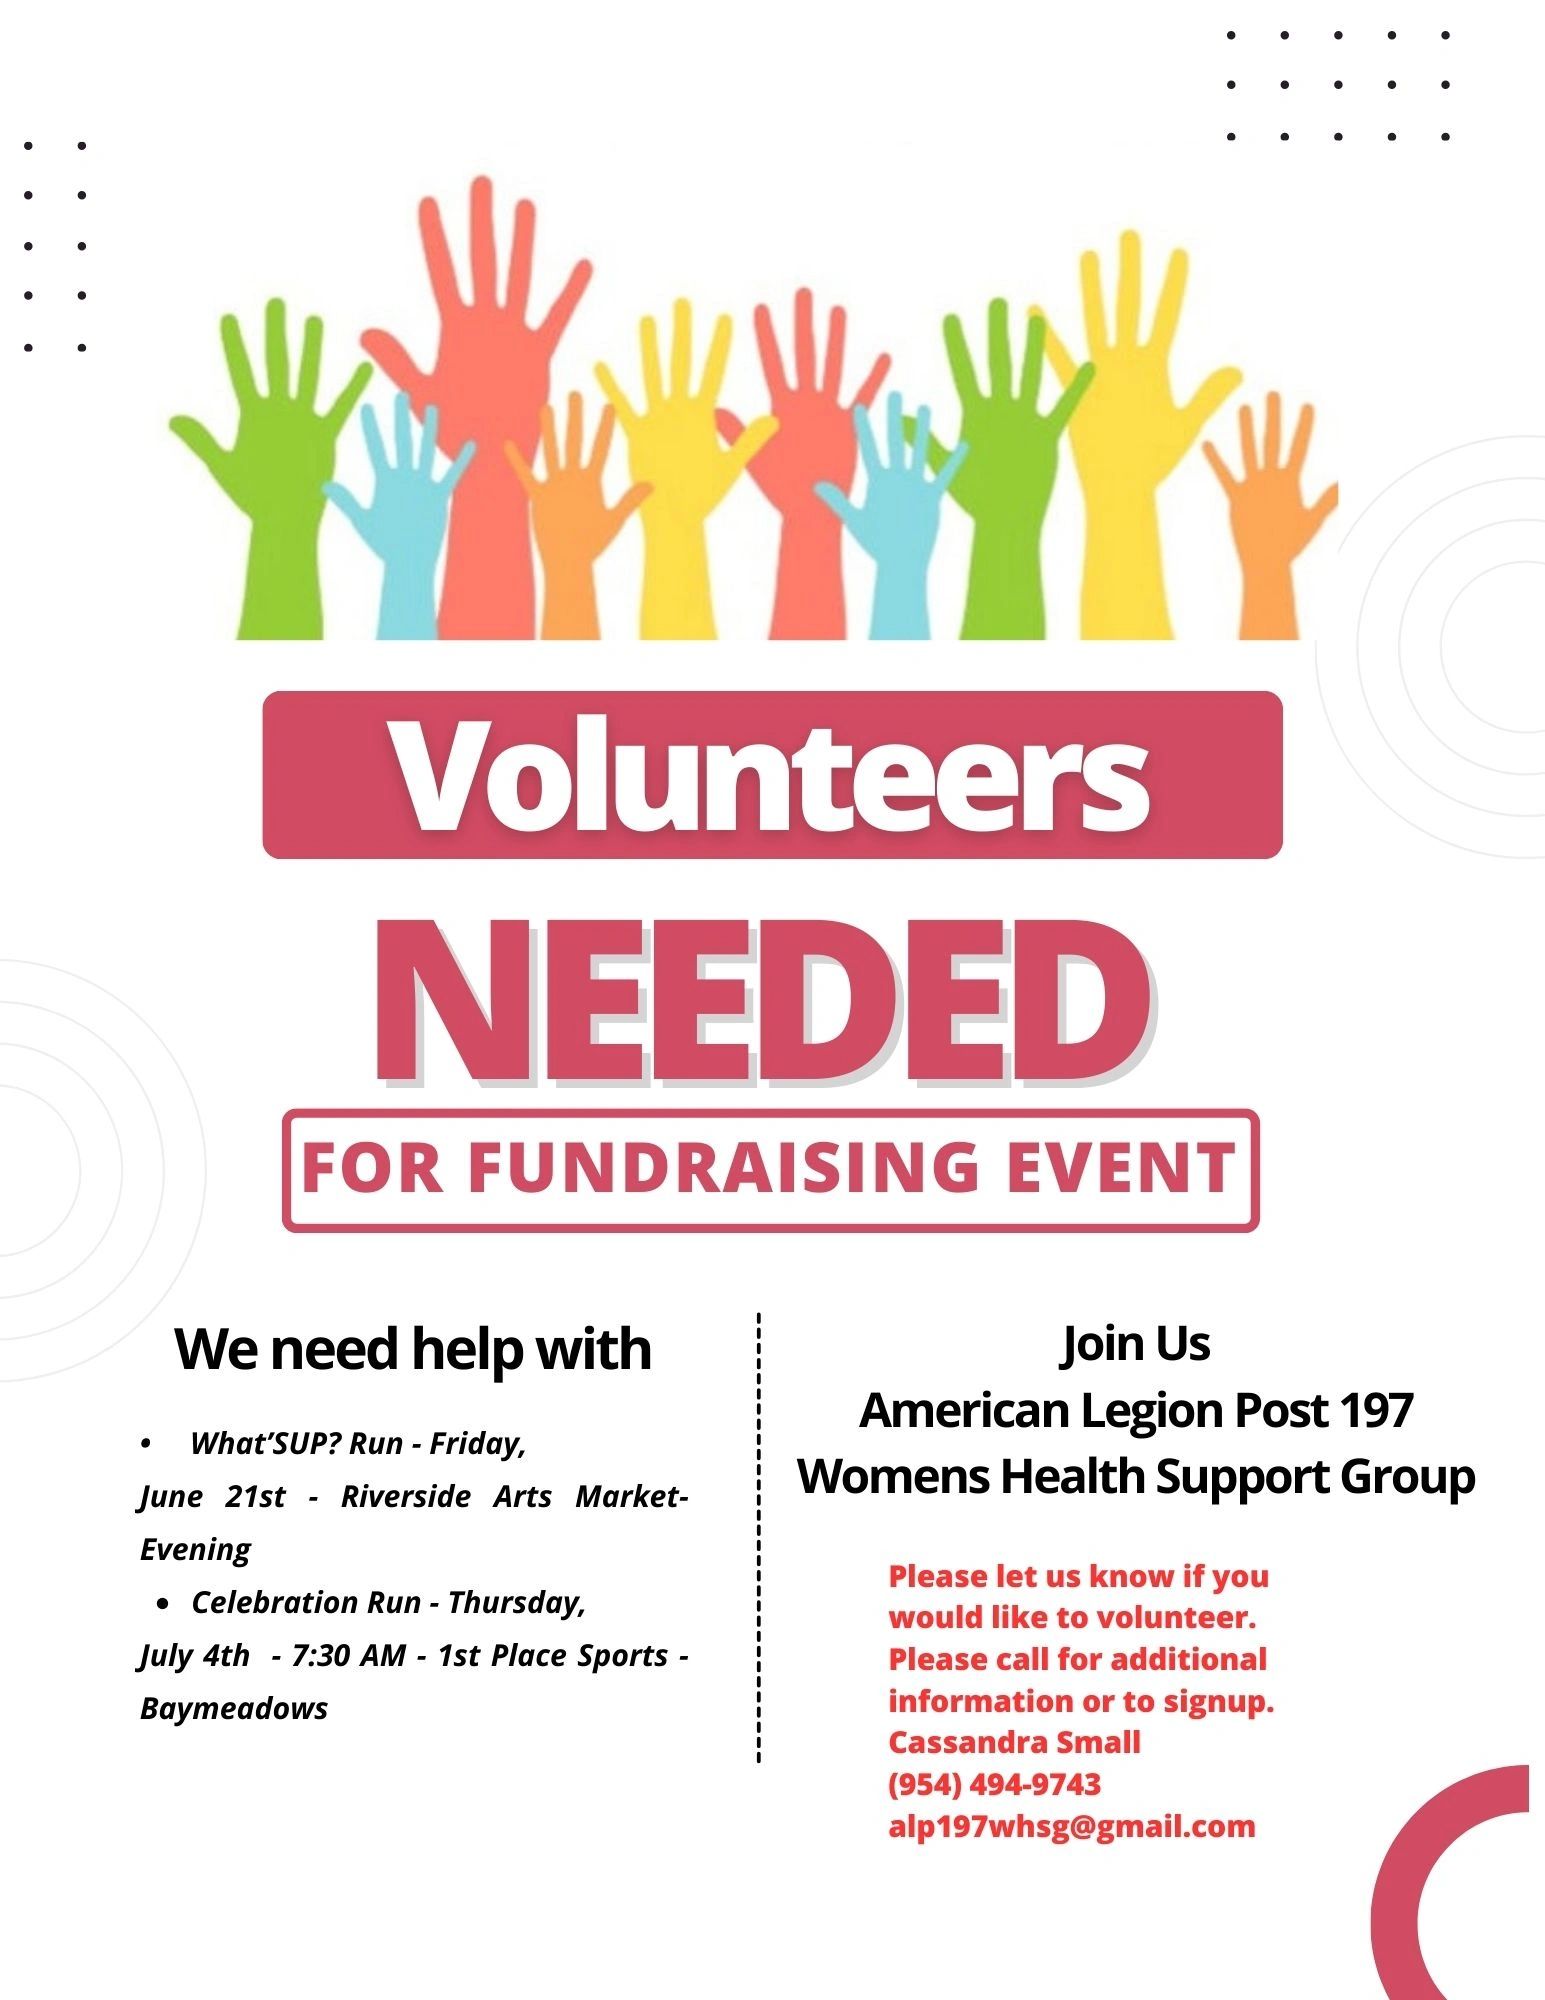 Volunteers Needed for fundraising event.  contact 904-494-9743 email alp197whsg@gmail.com